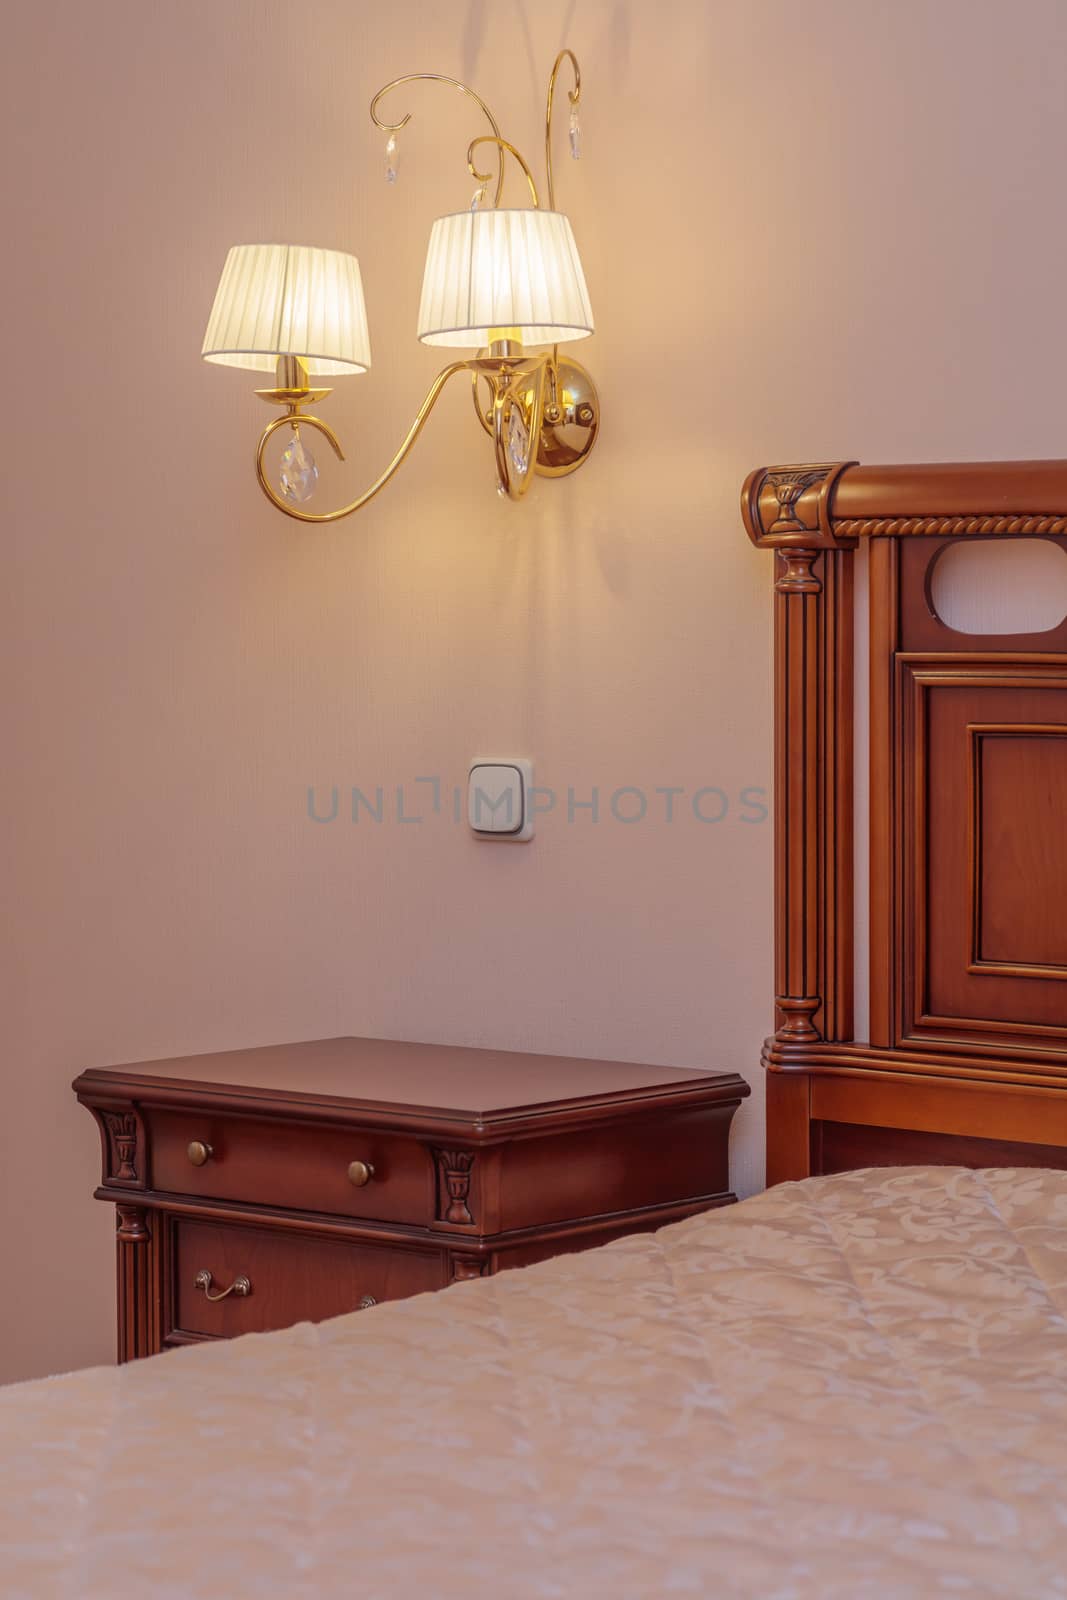 Warm cozy lamp near bed on nightstand